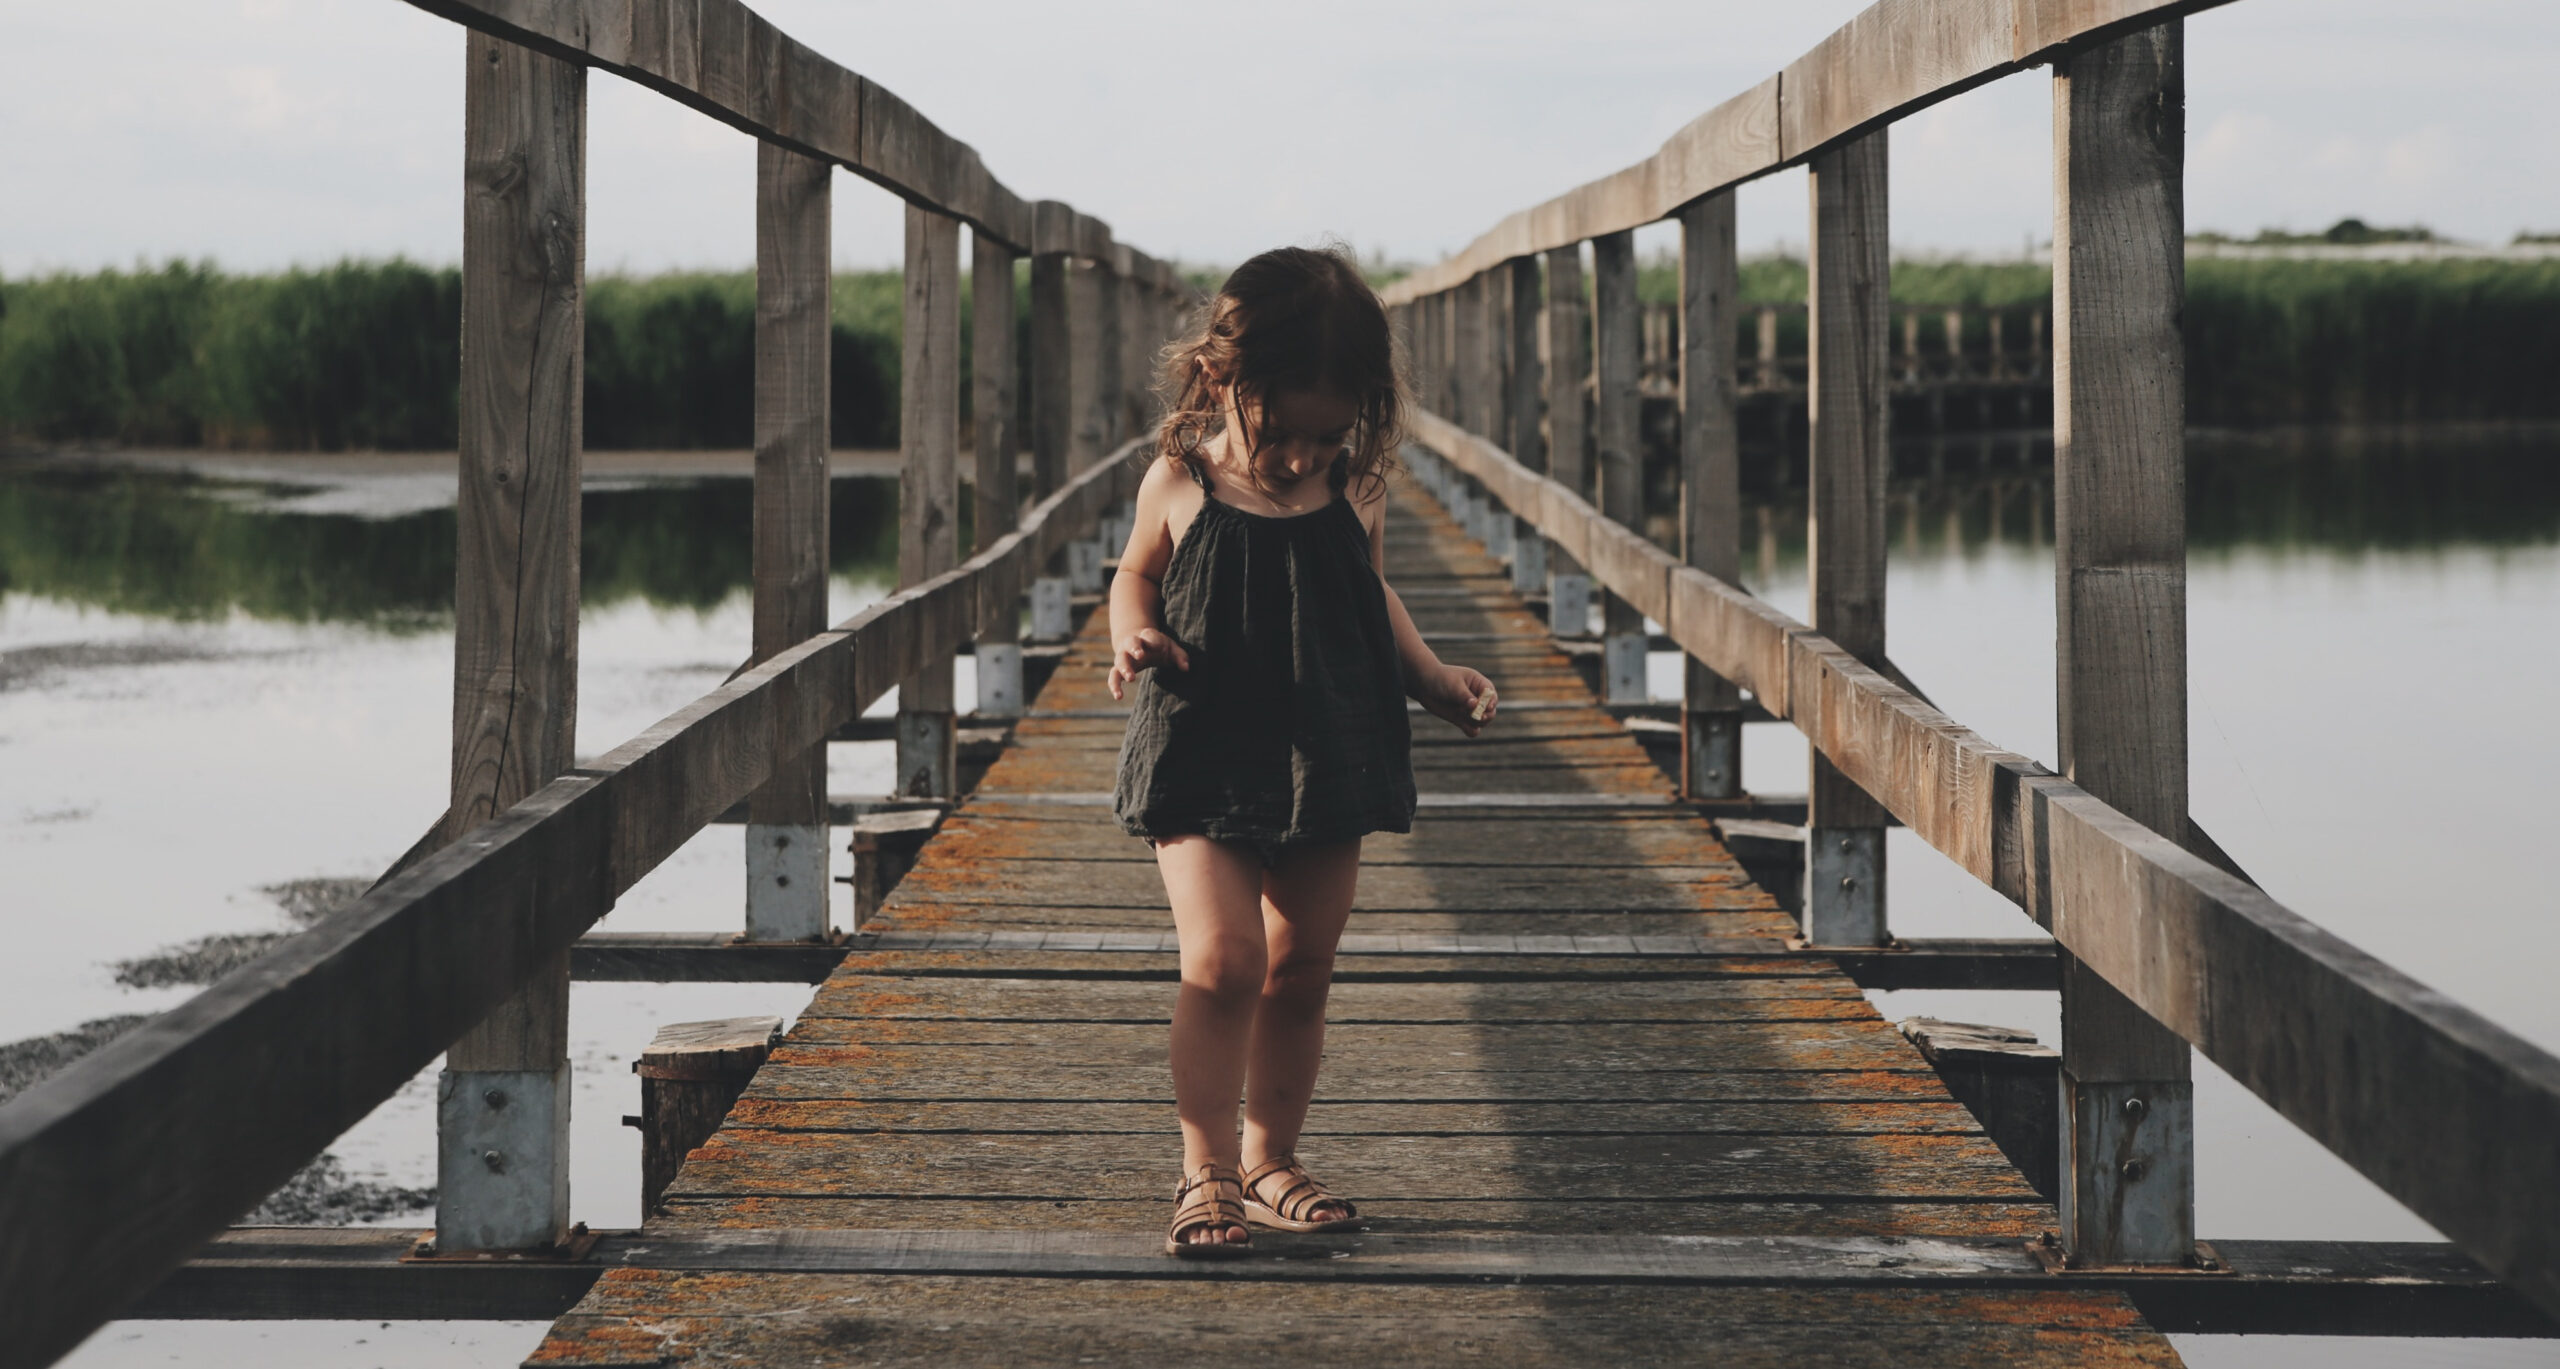 a child standing alone on a wooden walkway over water